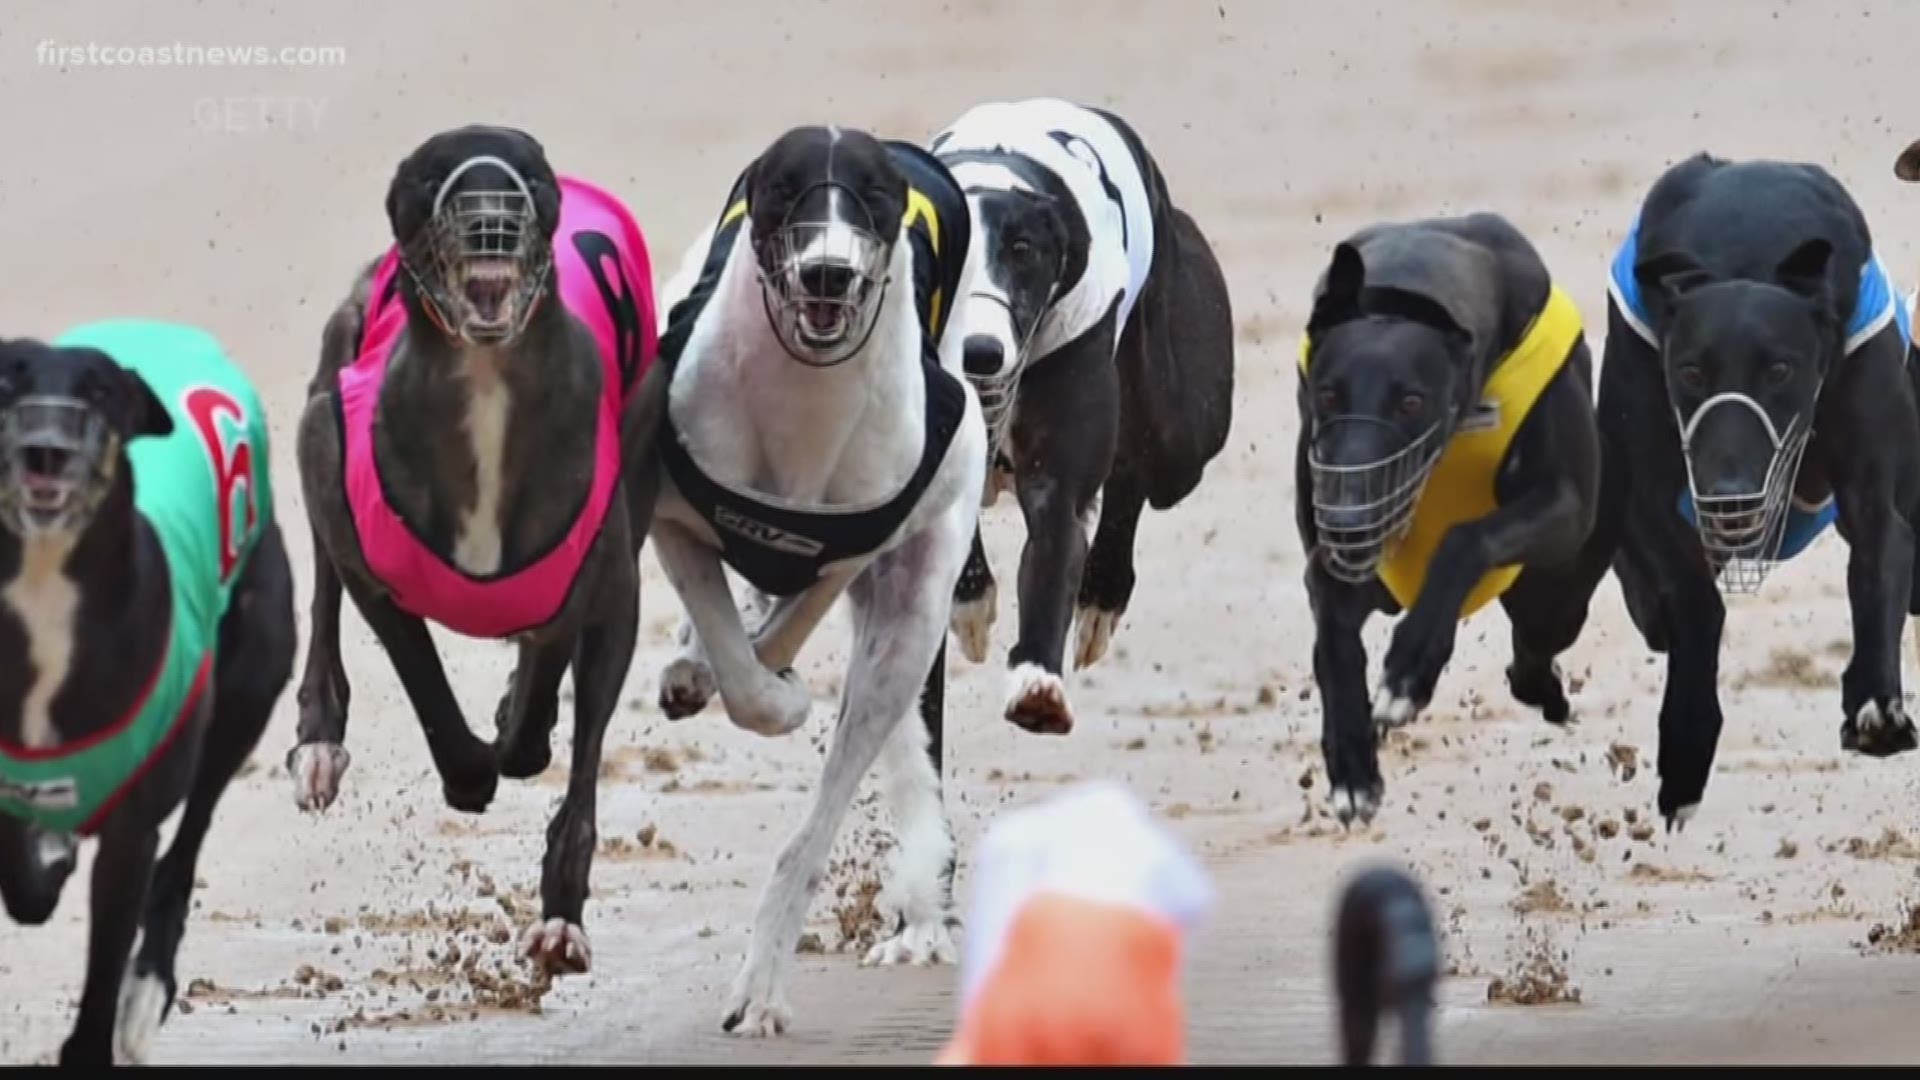 Tony Glover regulated the majority of greyhound race tracks in the country in 2016 and 2017. He's opening up about what made him change his mind about the sport and how he's responding to critics.